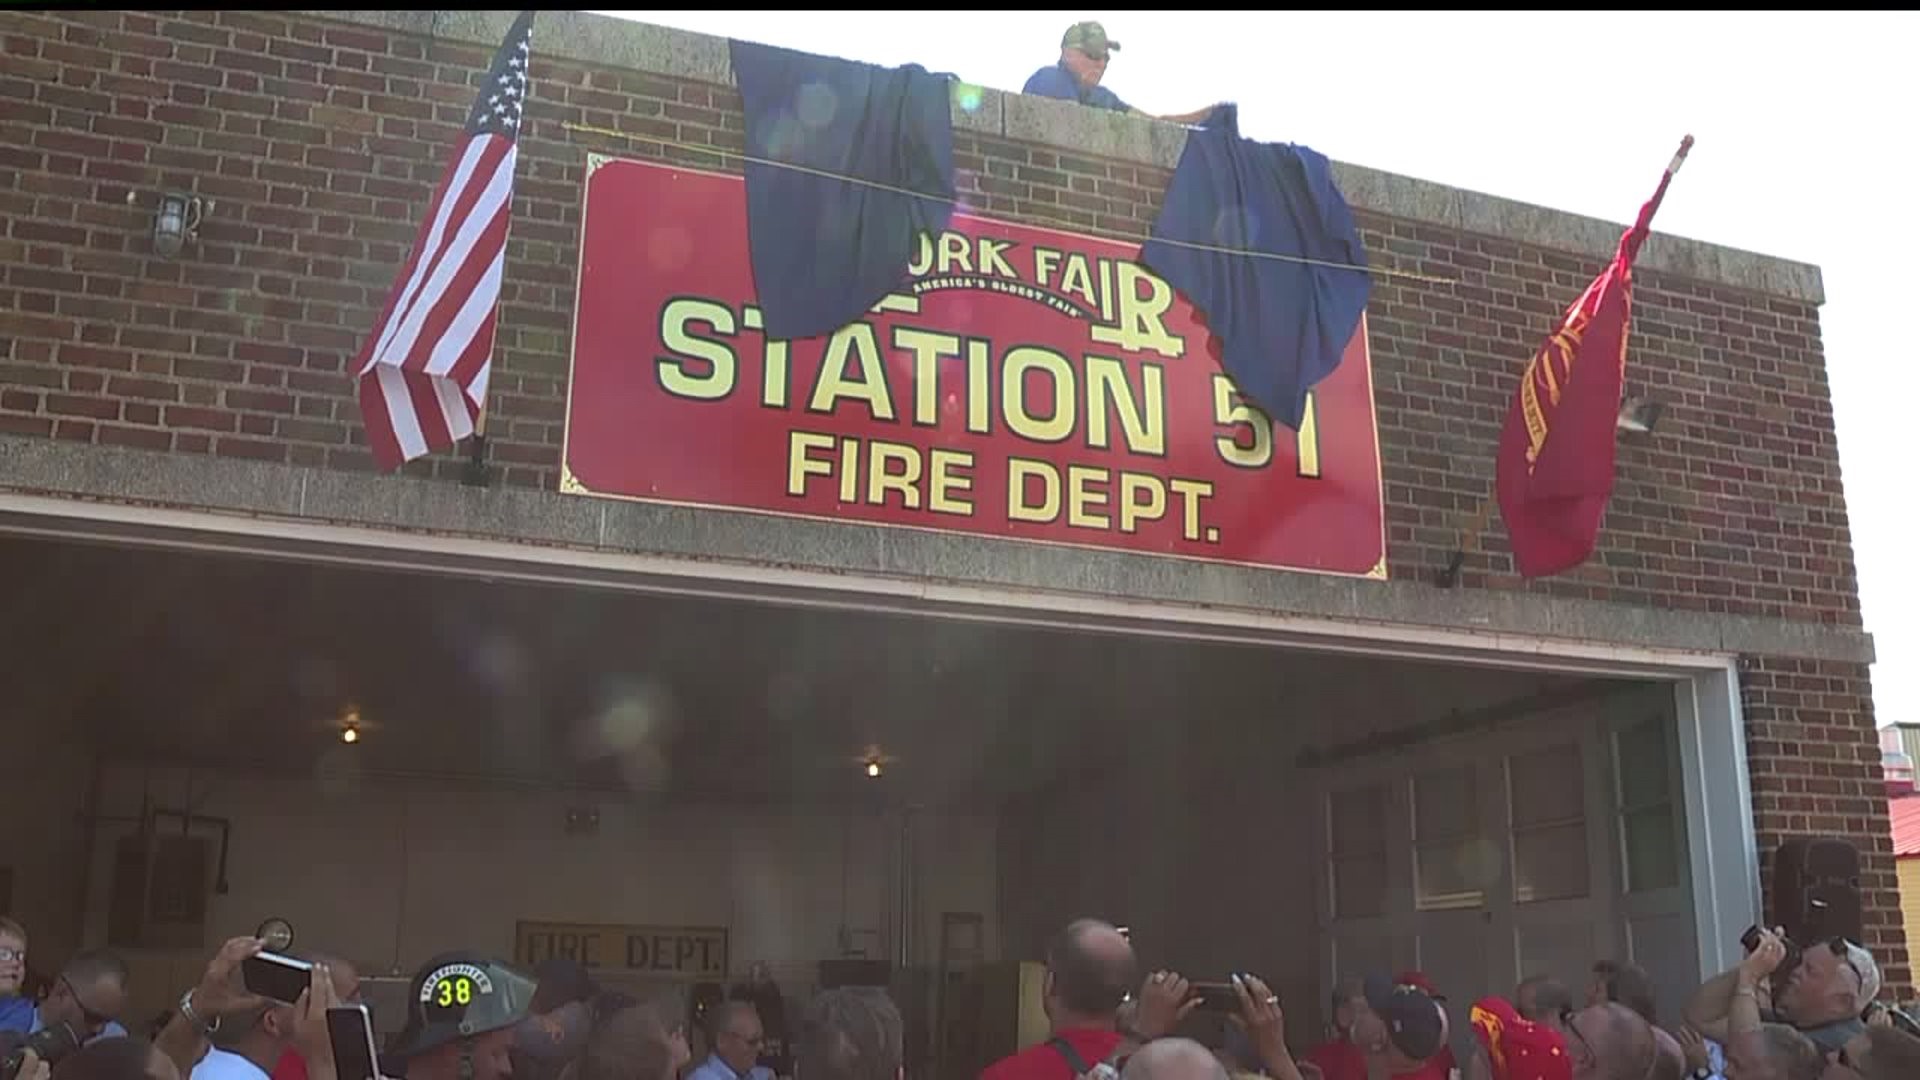 York Fair Fire Department reveals official station No. during rededication ceremony